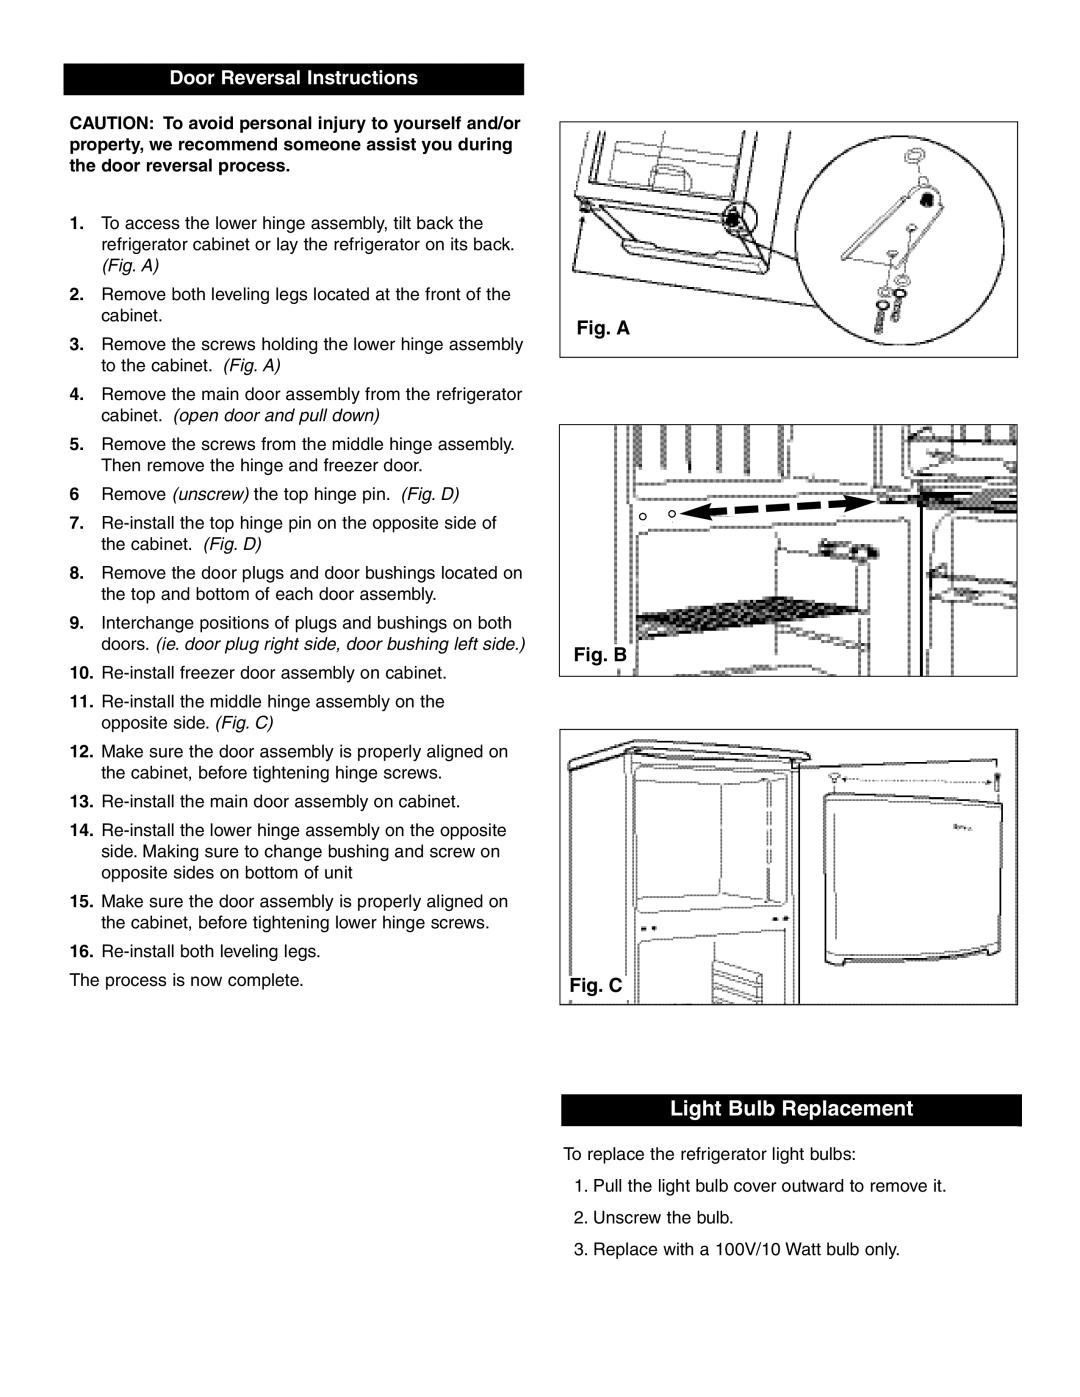 Simplicity SCR412BLS owner manual Light Bulb Replacement, Door Reversal Instructions, Fig. A Fig. B Fig. C 